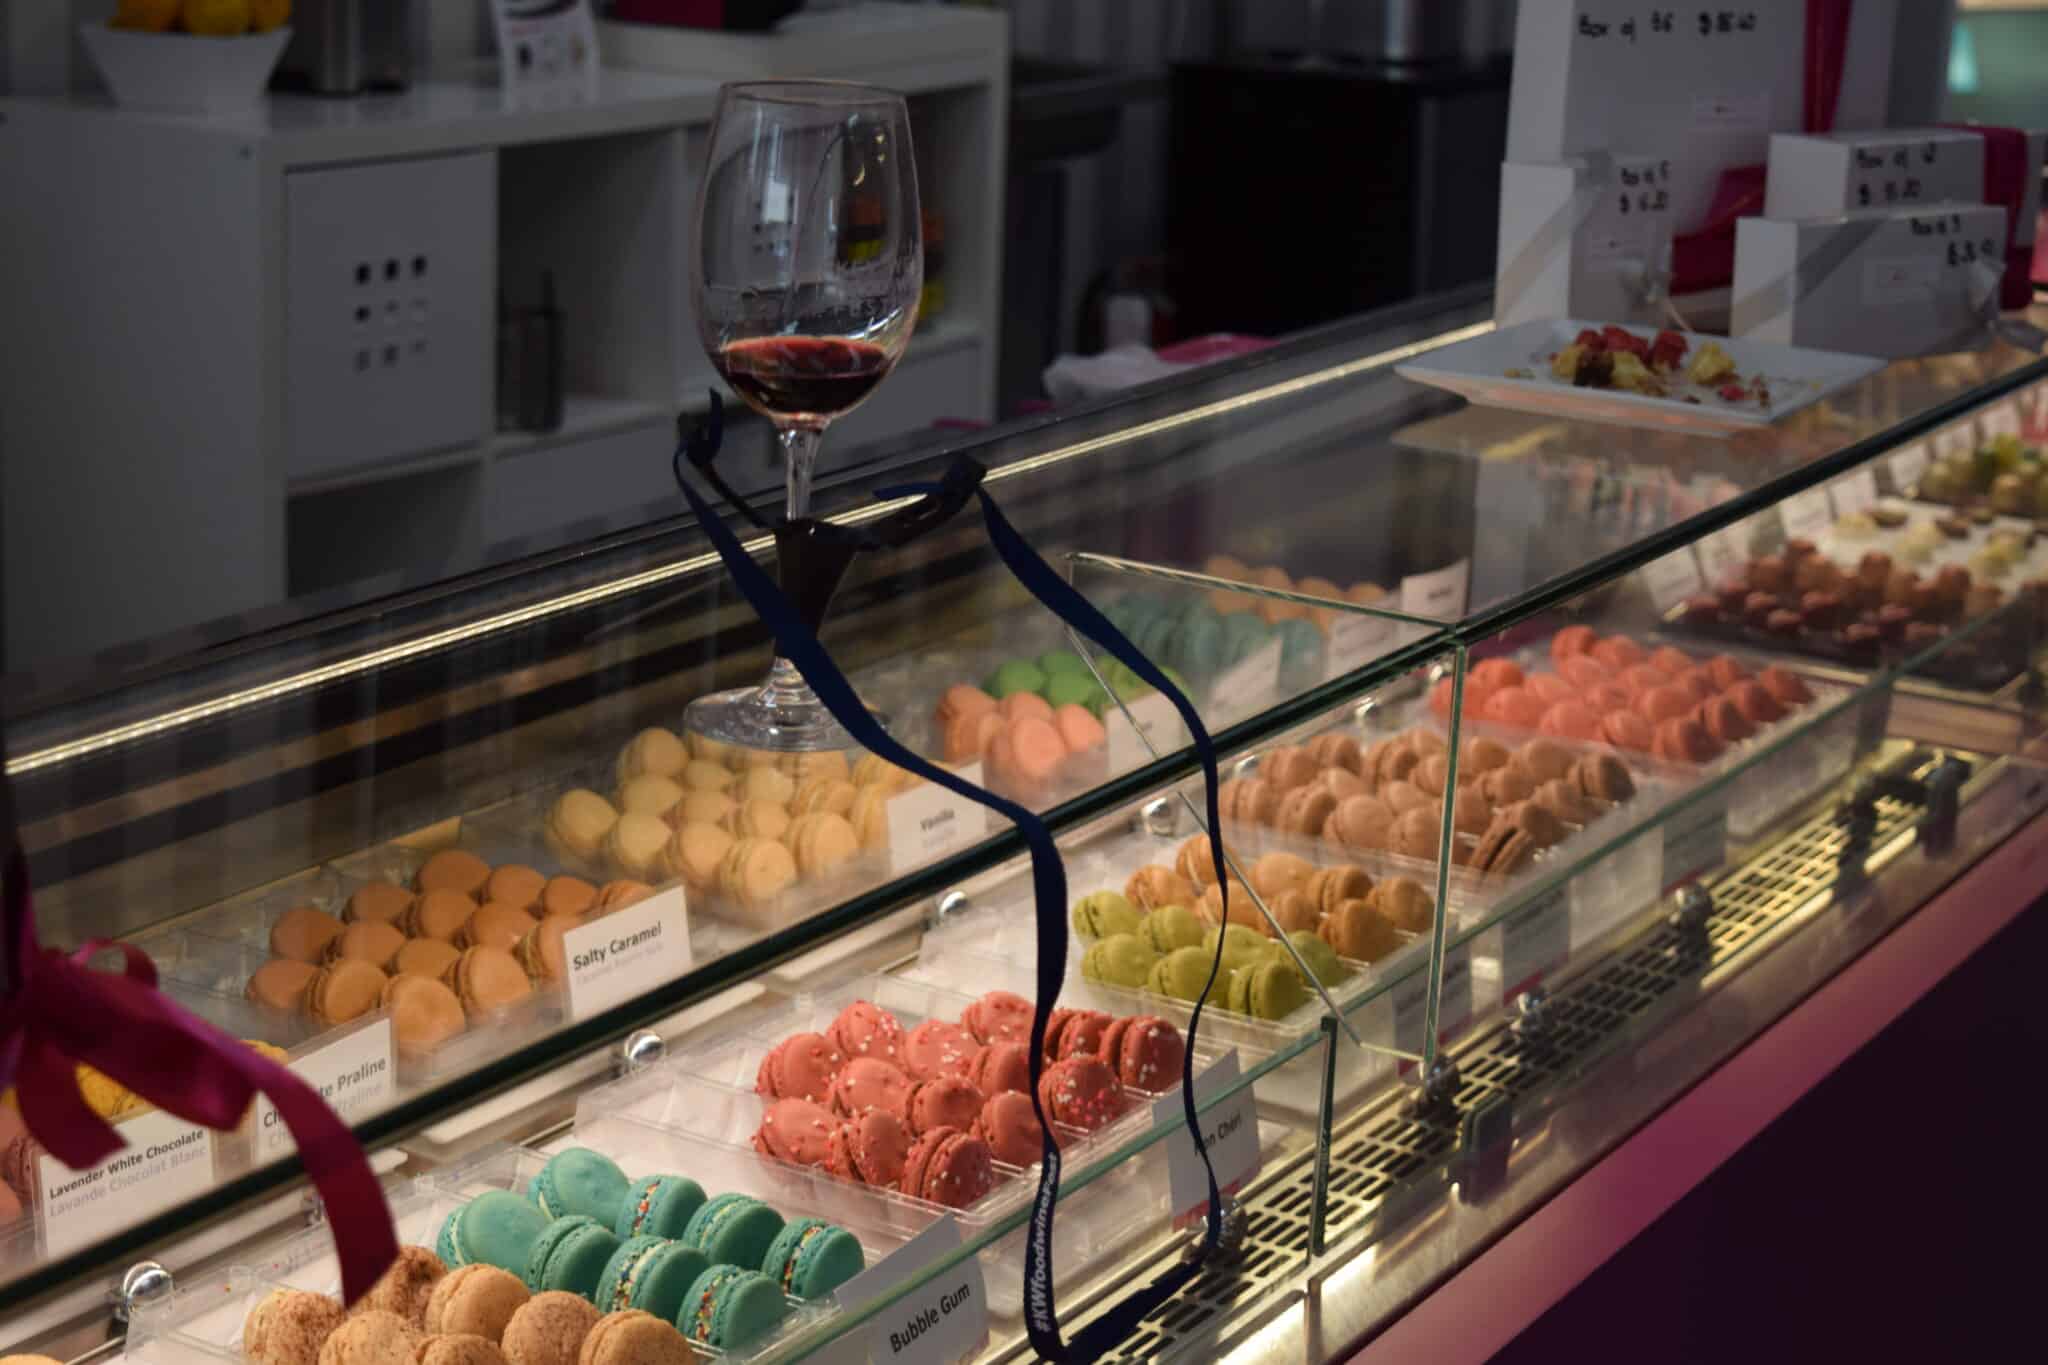 Le Macaron and its delicious selection of treats (Credit: Spencer Marker)